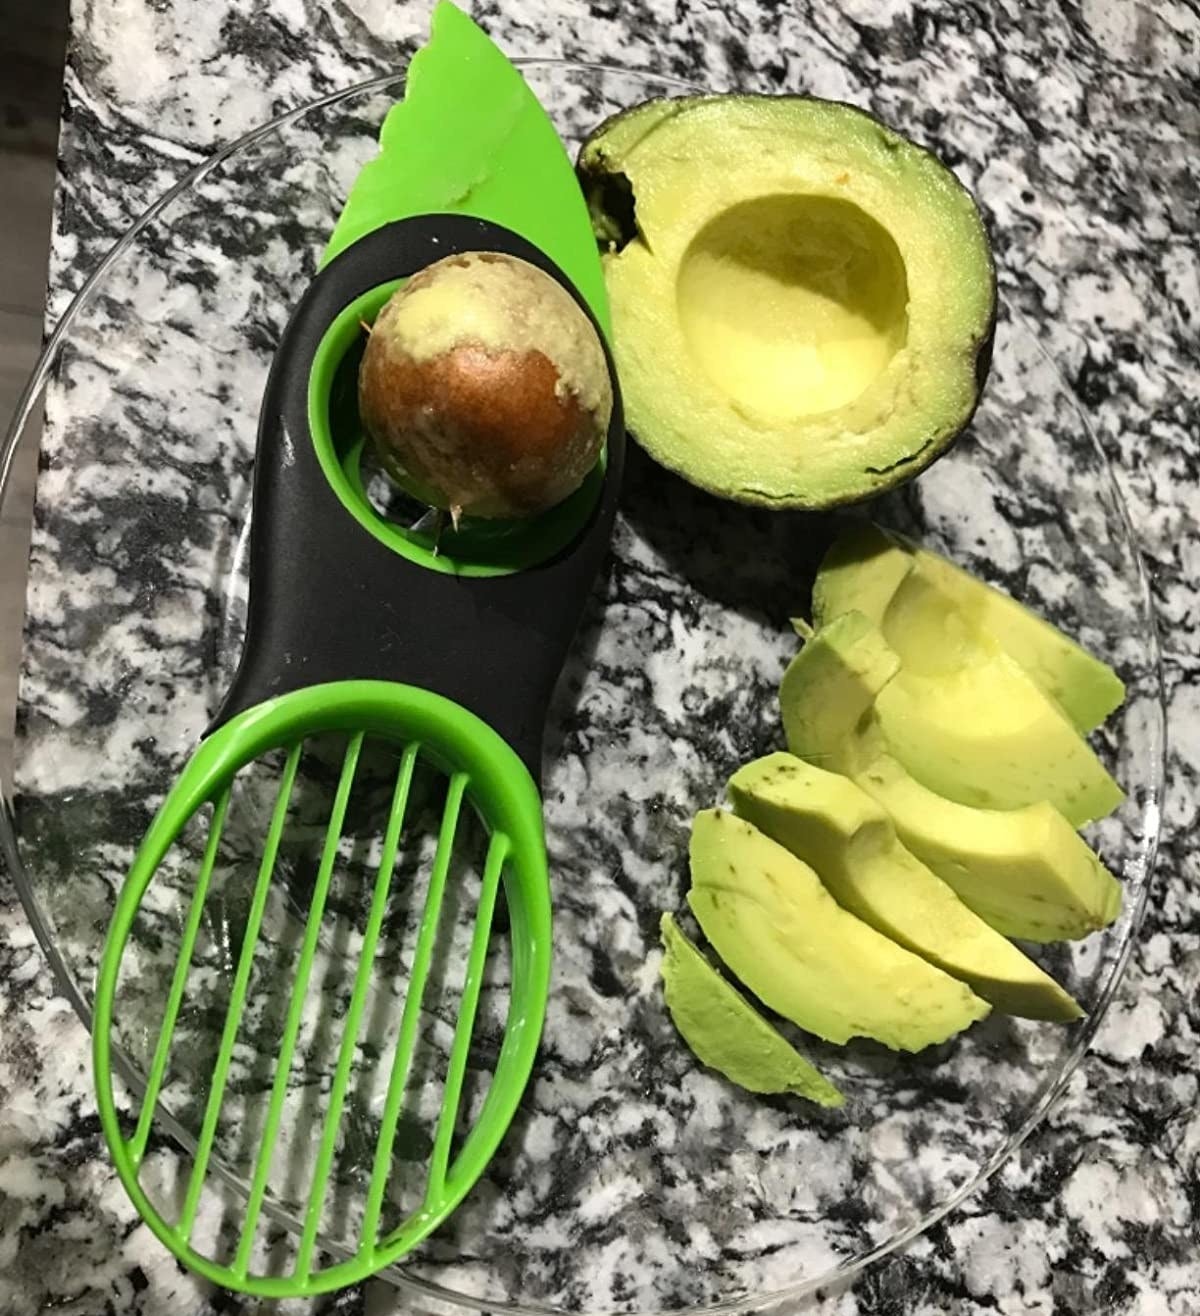 reviewer photo showing slicing tool next to slices of avocado on kitchen counter